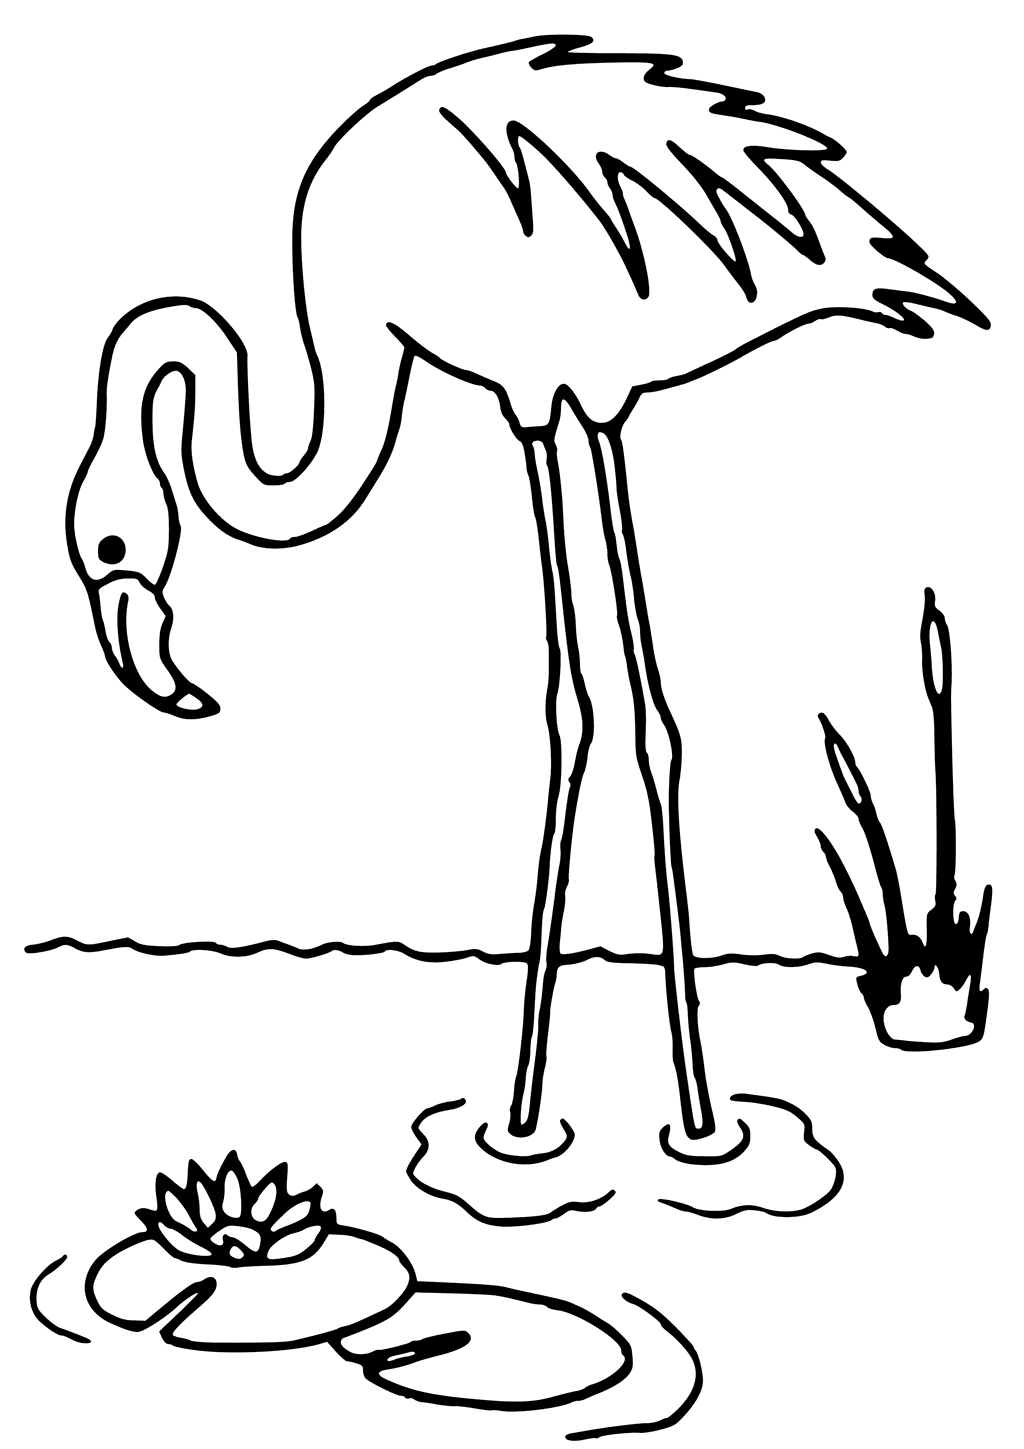 Flamingo Coloring Pages Best Coloring Pages For Kids